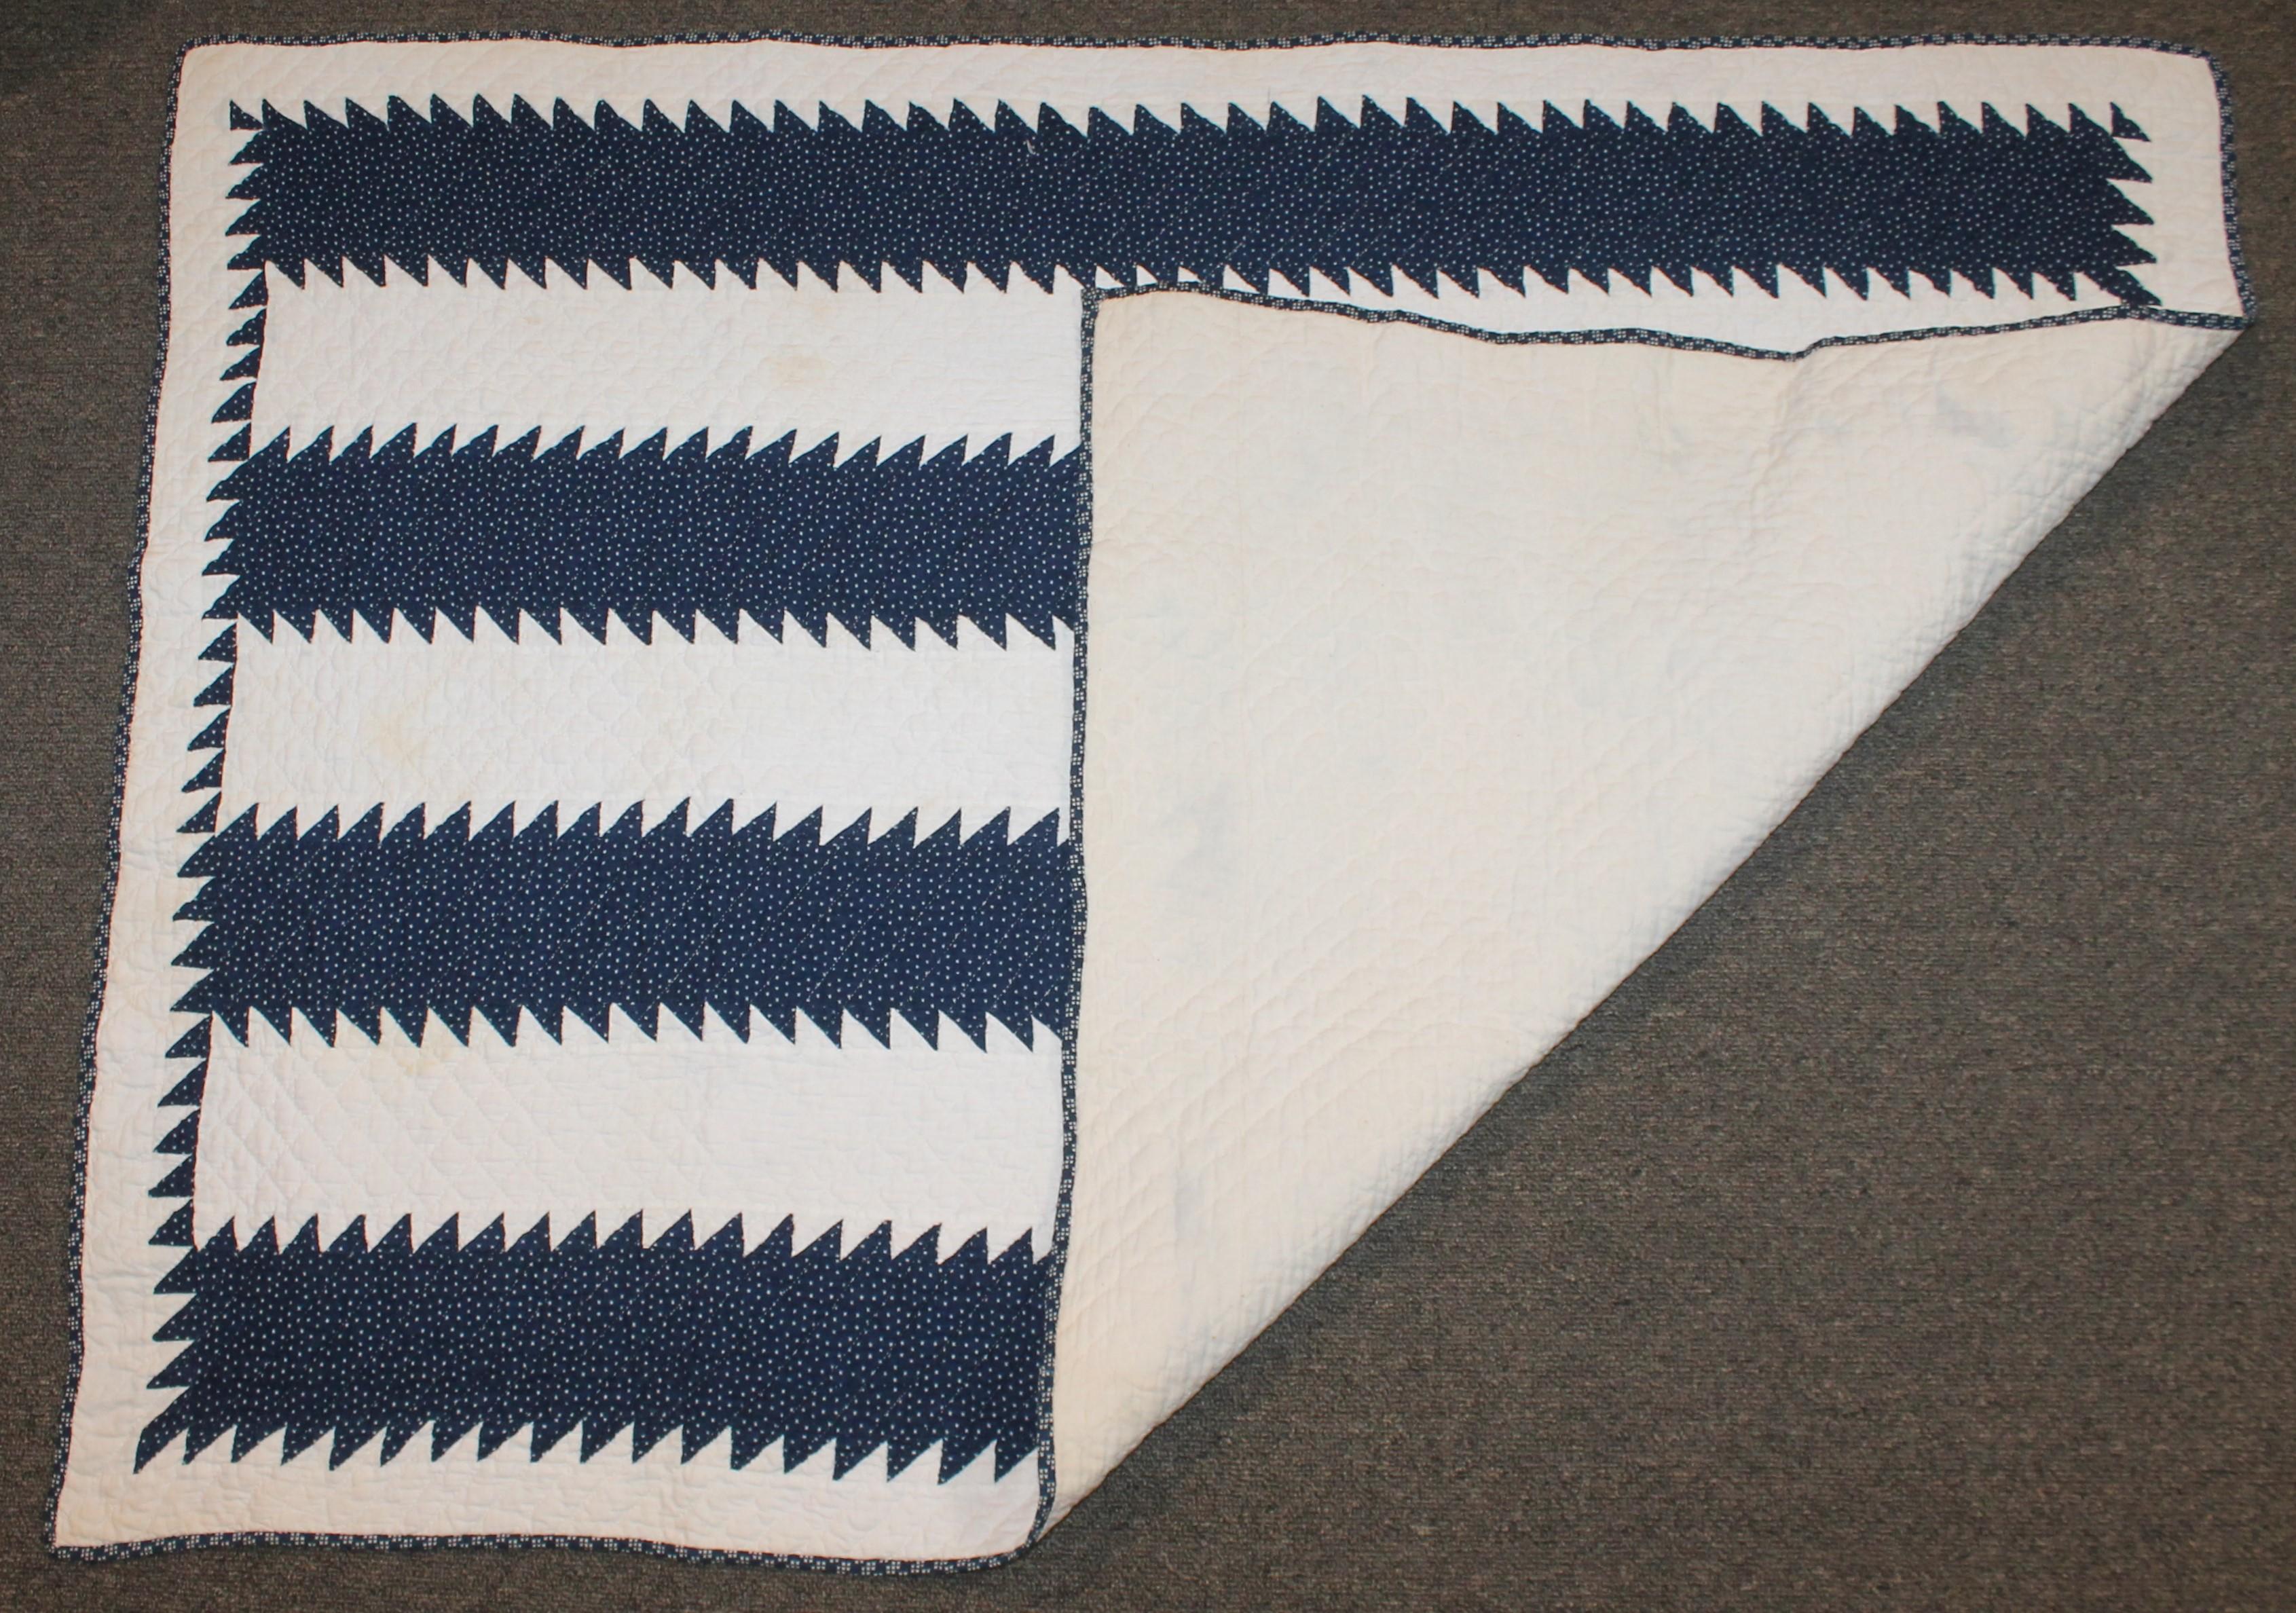 This 19th century blue calico saw tooth bars crib quilt is in pristine condition. This is quite unusual to find in a crib quilt. The saw tooth inner border is a fantastic added feature to complete the pattern of the crib quilt.